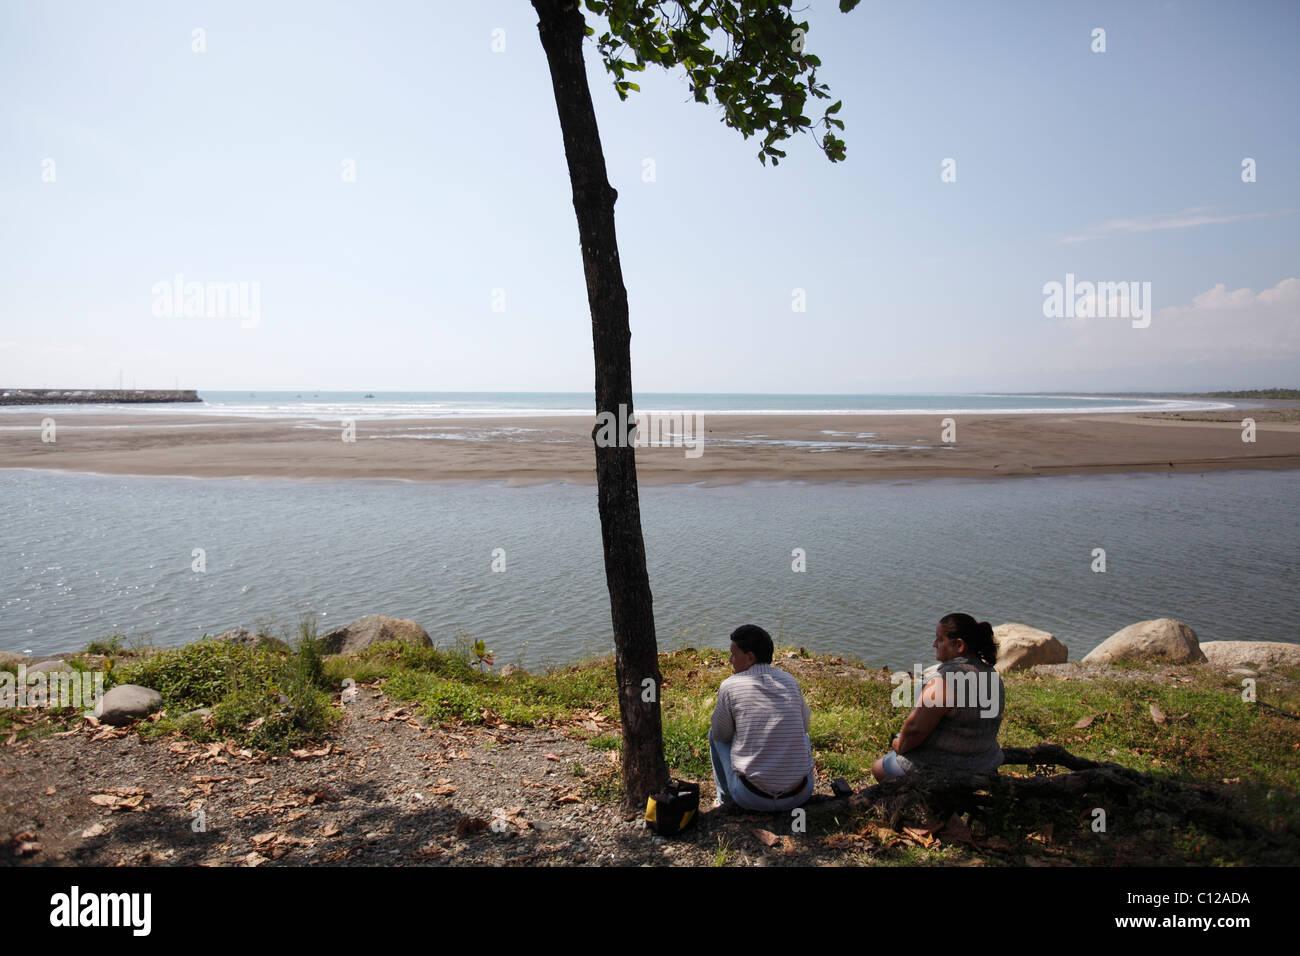 A man and a woman sit in the shade of a tree overlooking the beach and the entrance to the harbor in Quepos, Costa Rica Stock Photo